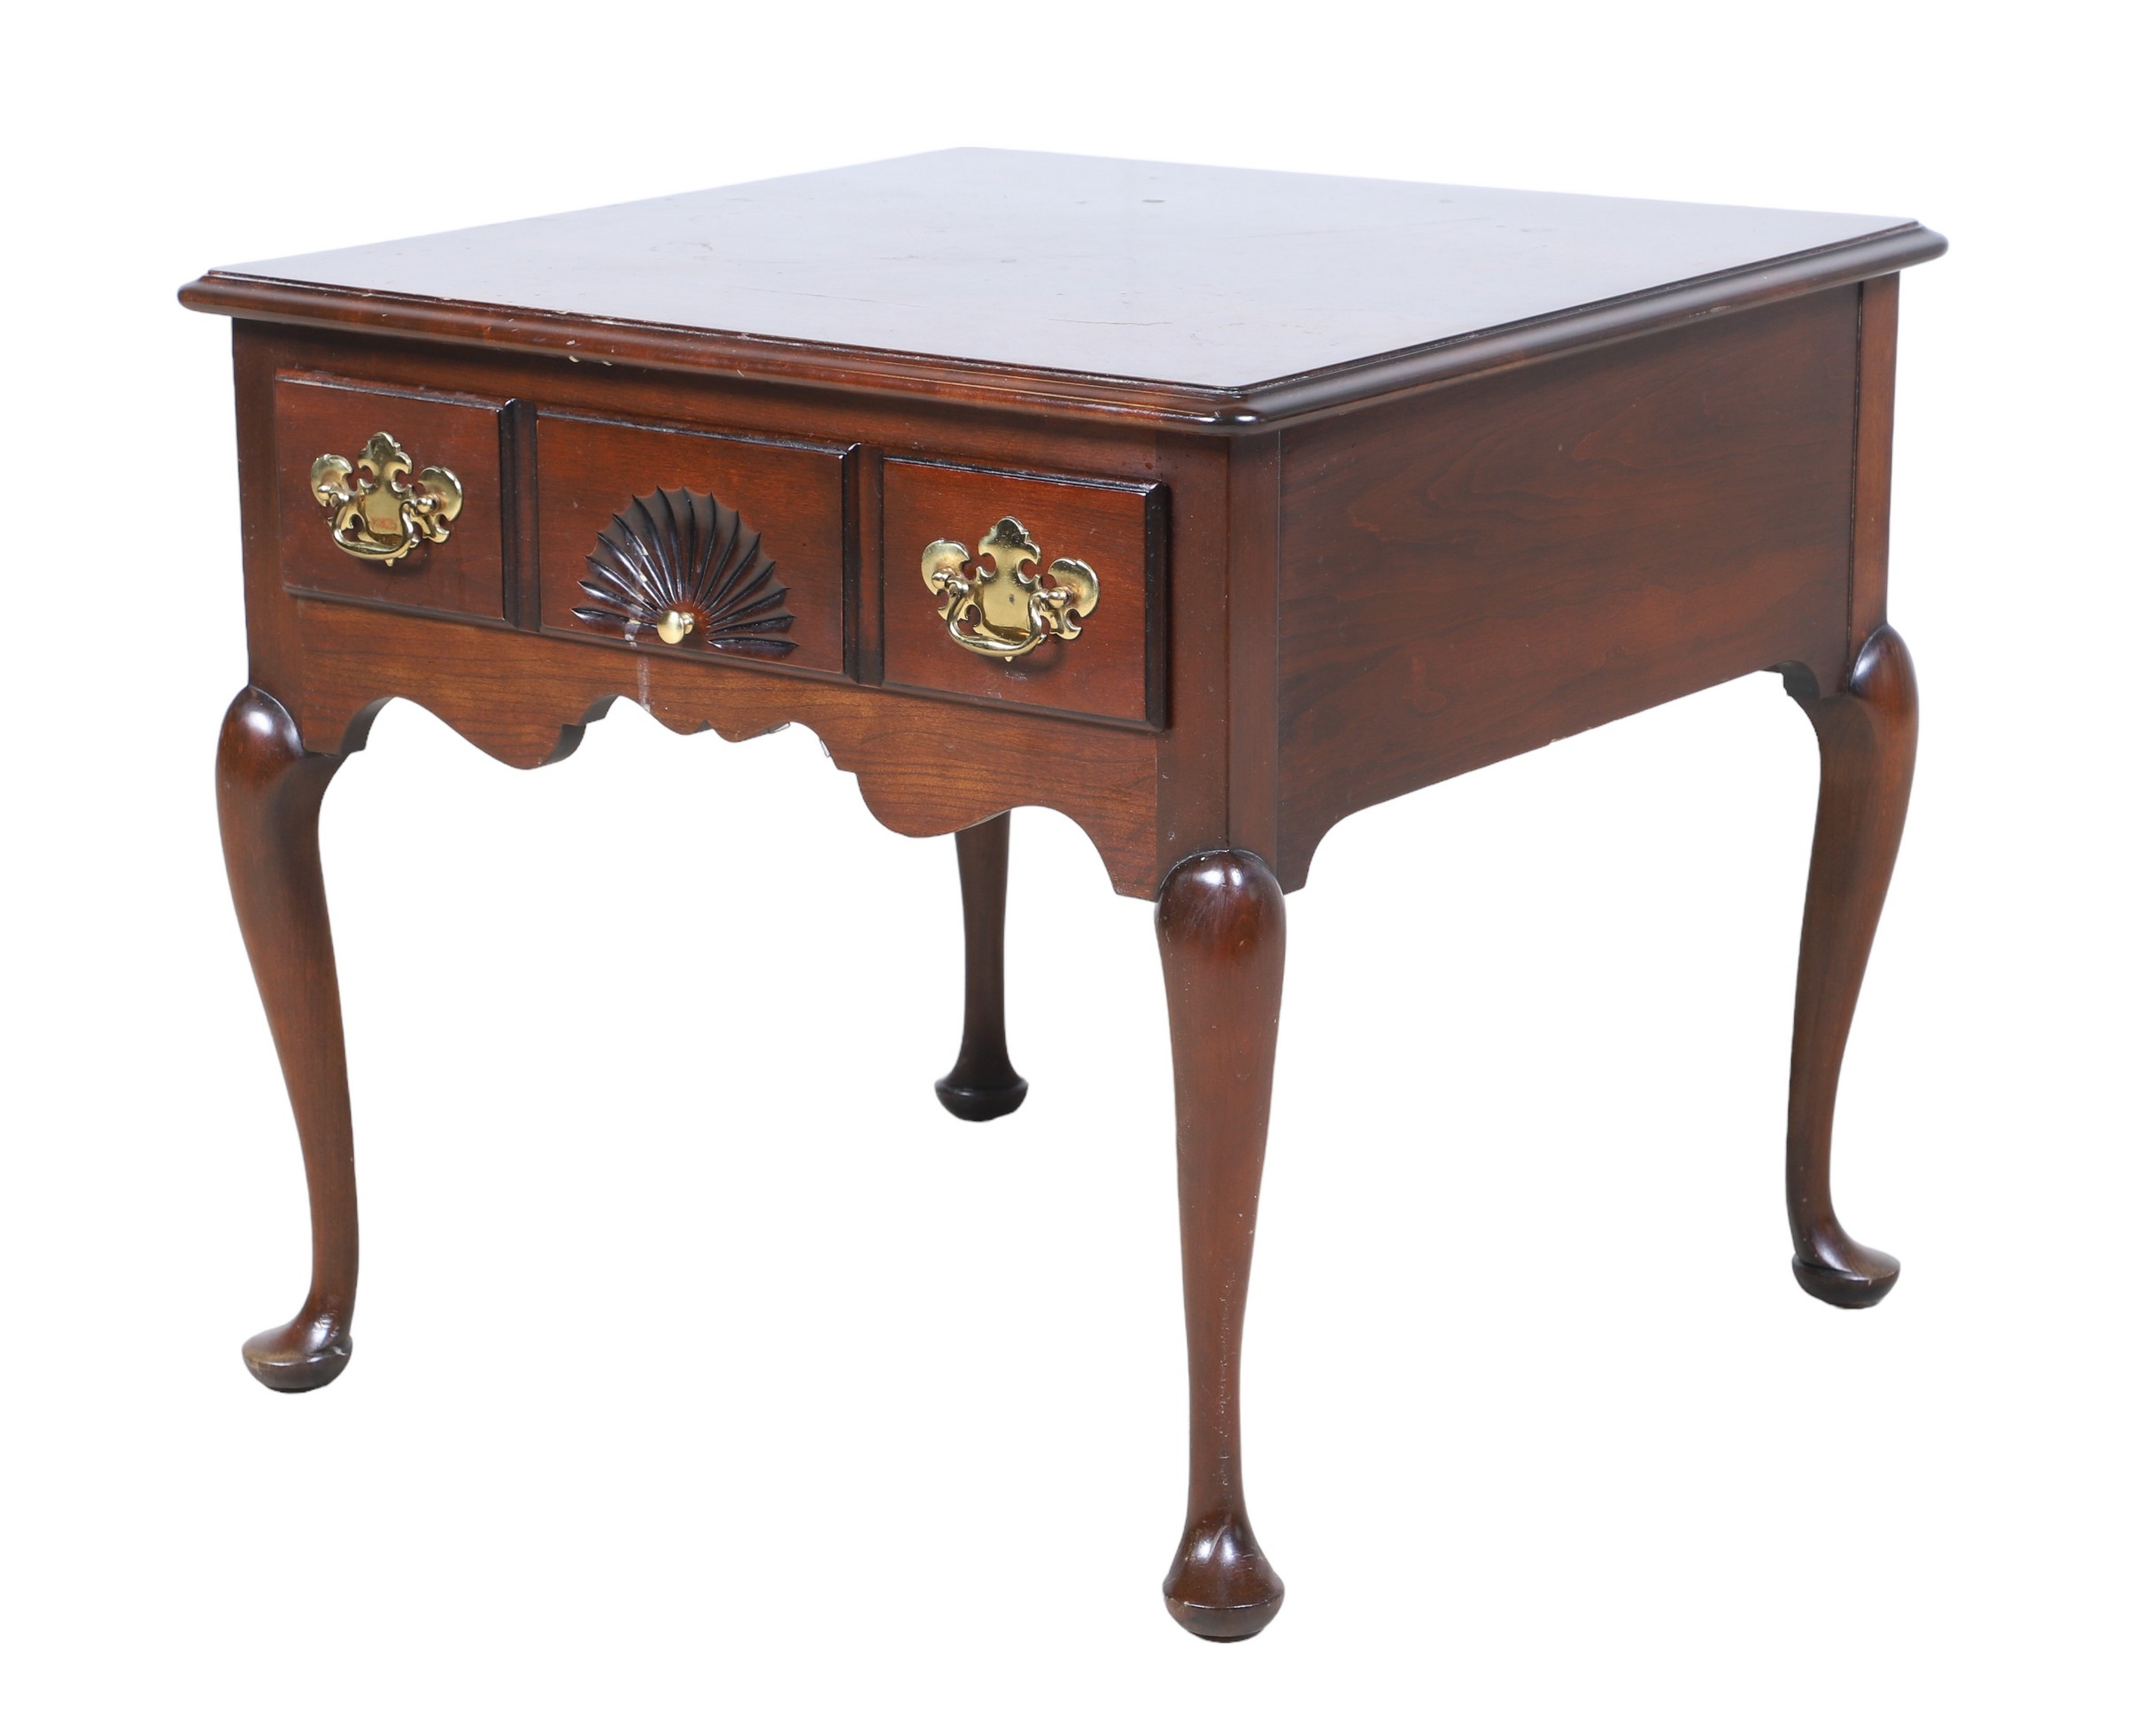 Statton Queen Anne style mahogany side